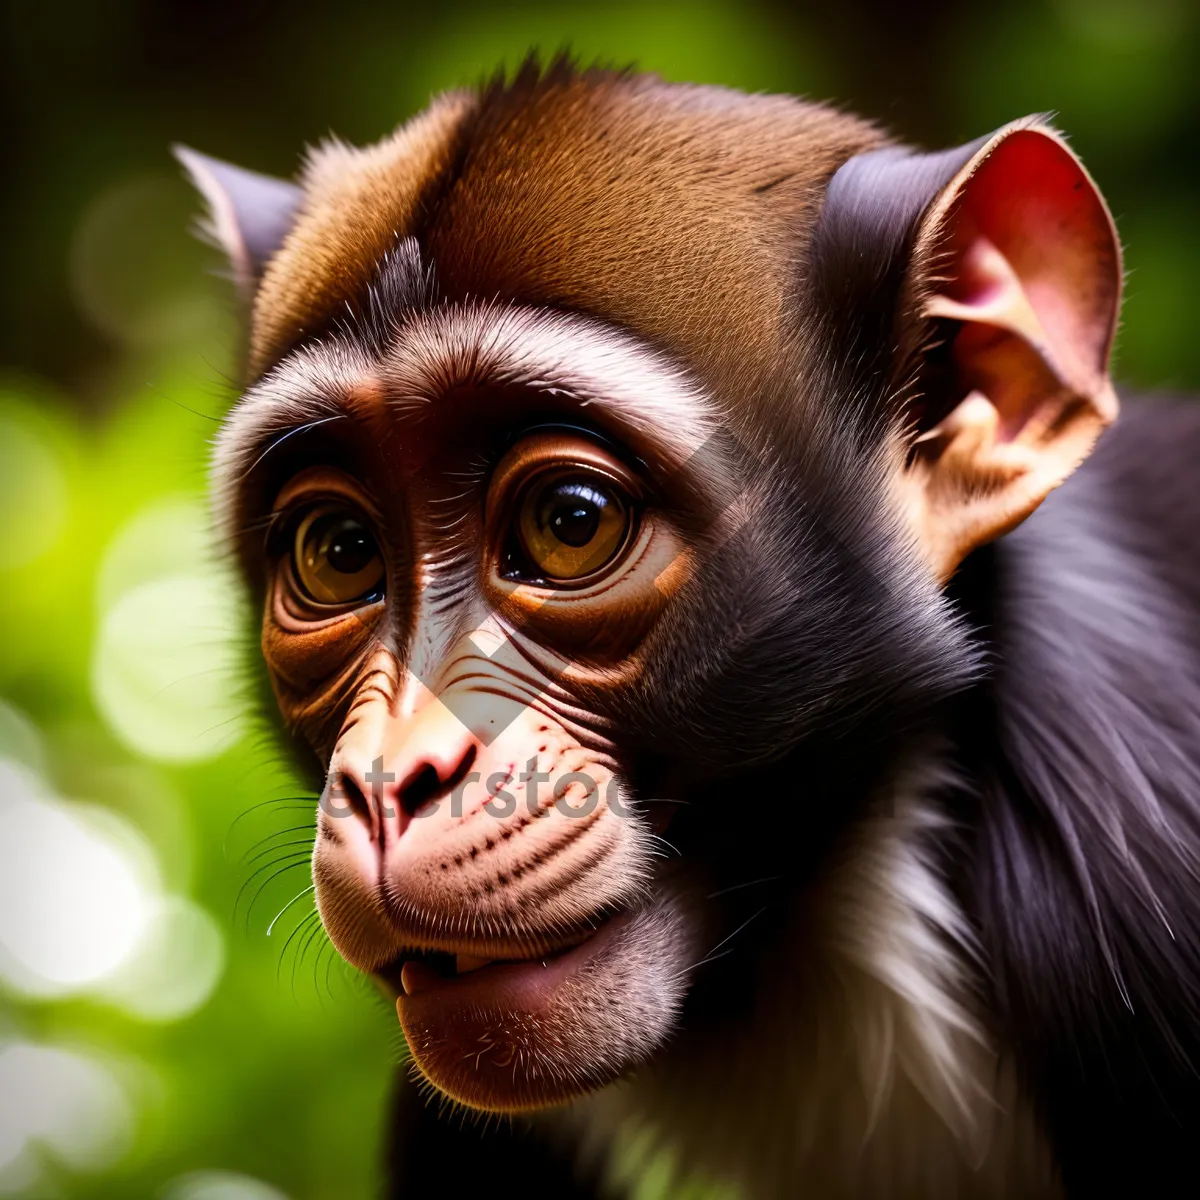 Picture of Wild Primate Baby with Expressive Face